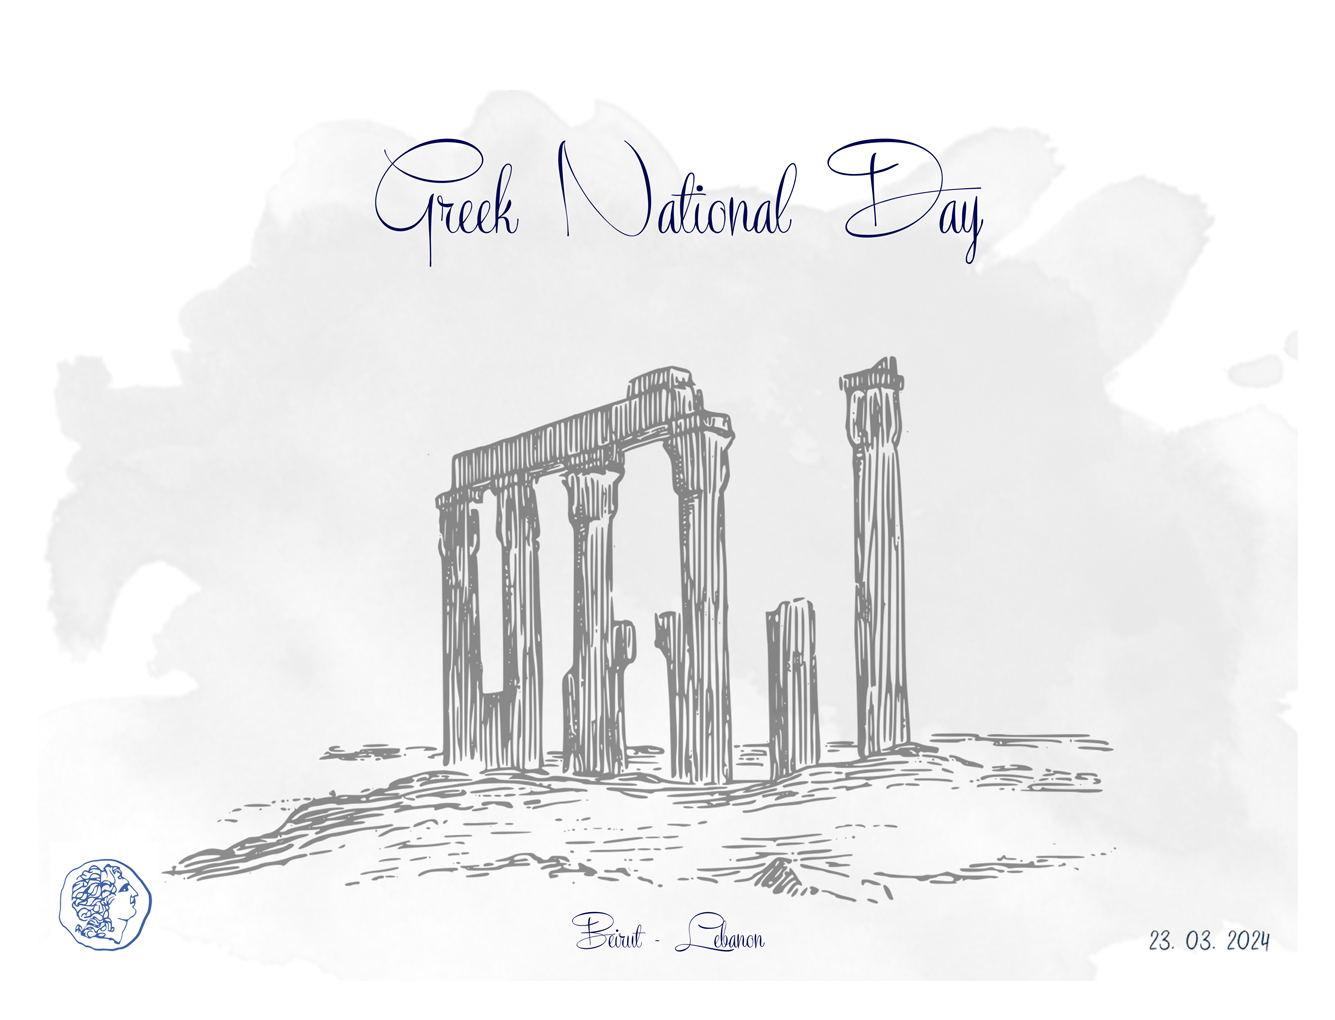 Celebrating the National Day of Greece on March 23, 2024